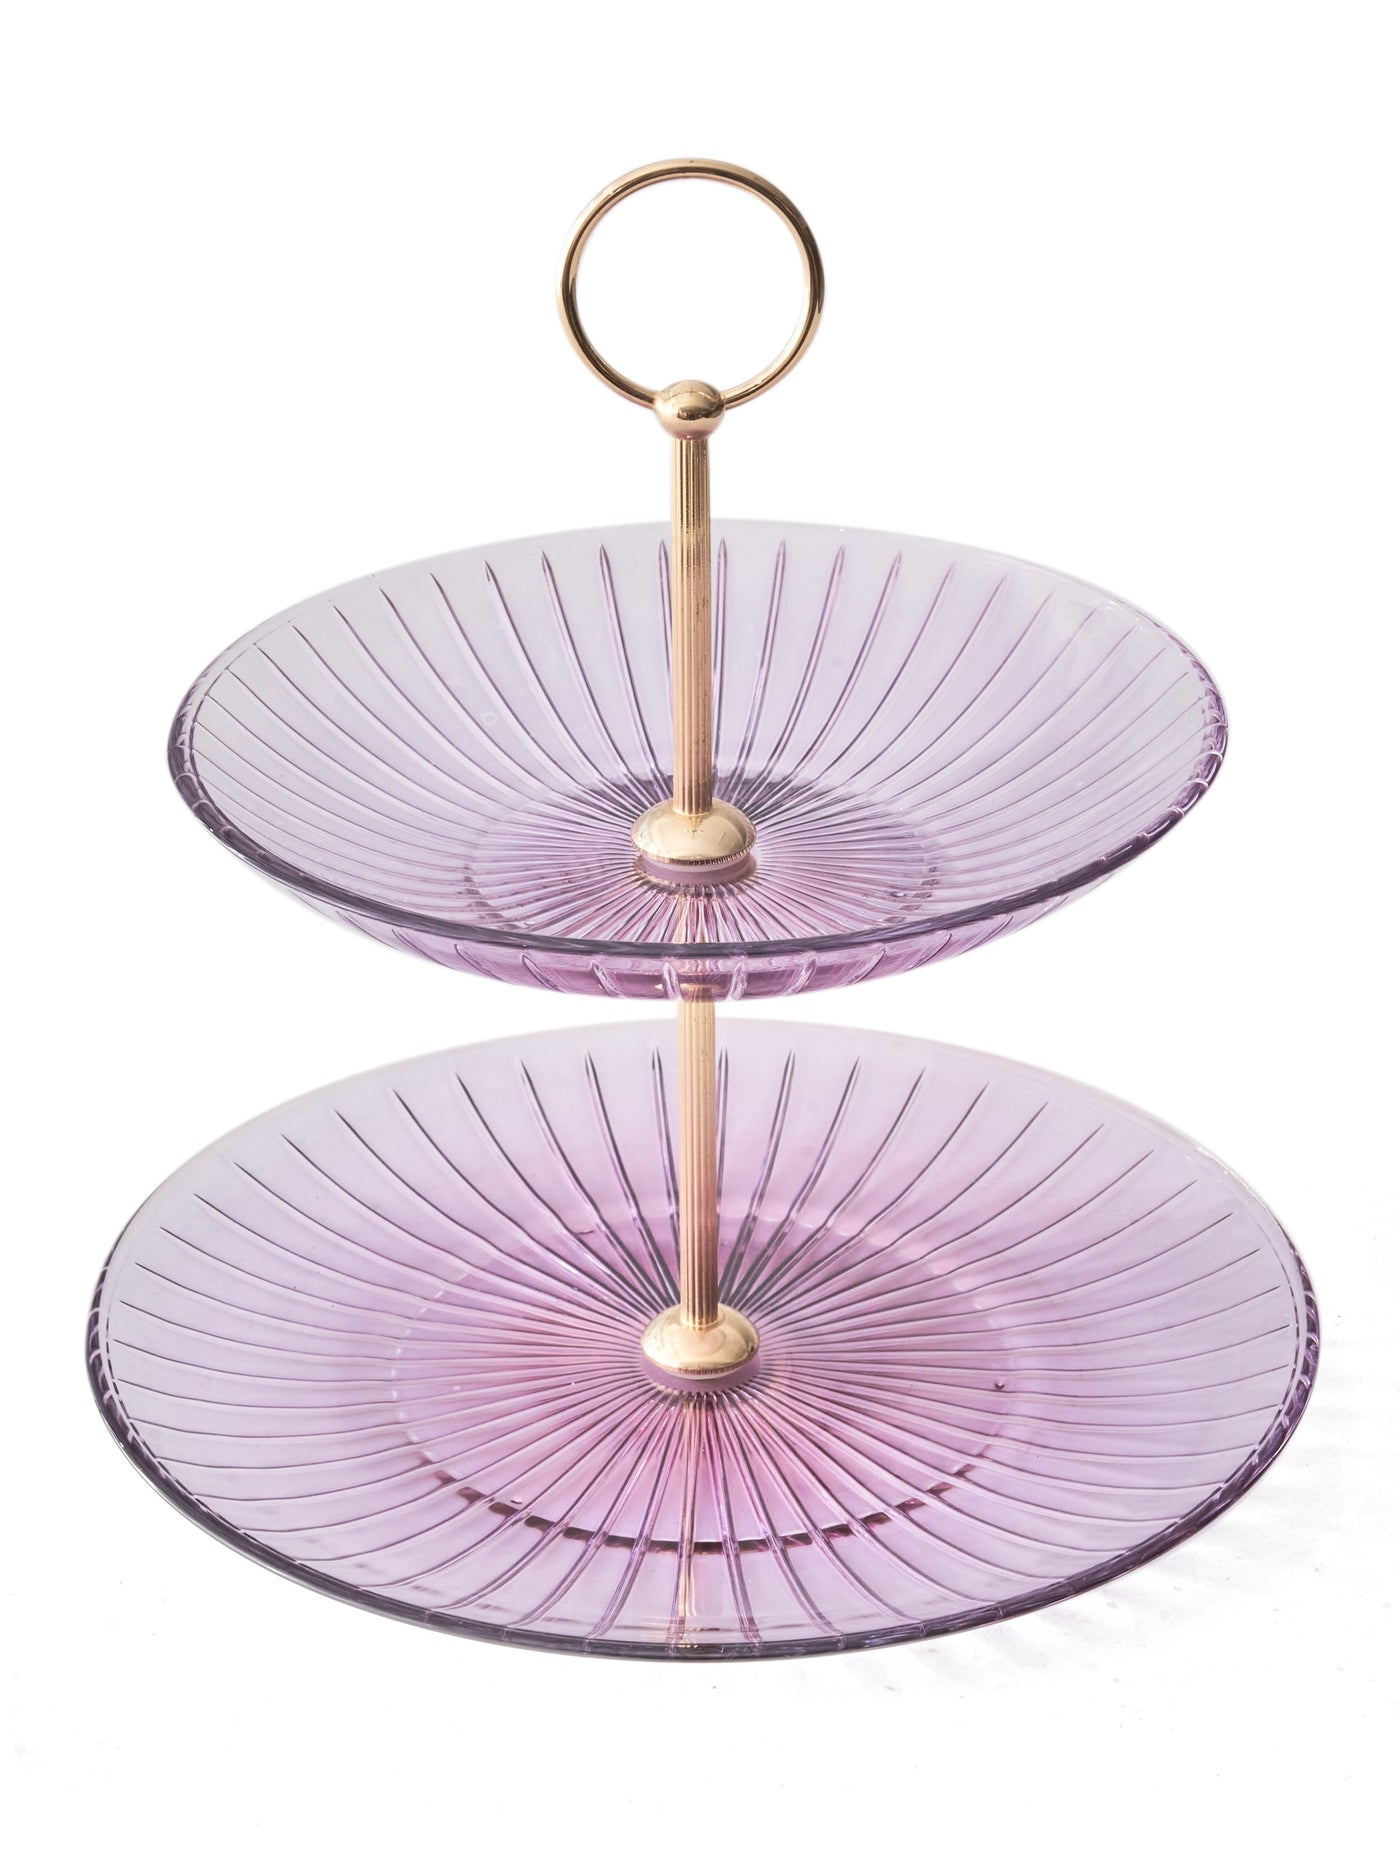 Ada Purple Tiered Stand for Afternoon Tea by Creart